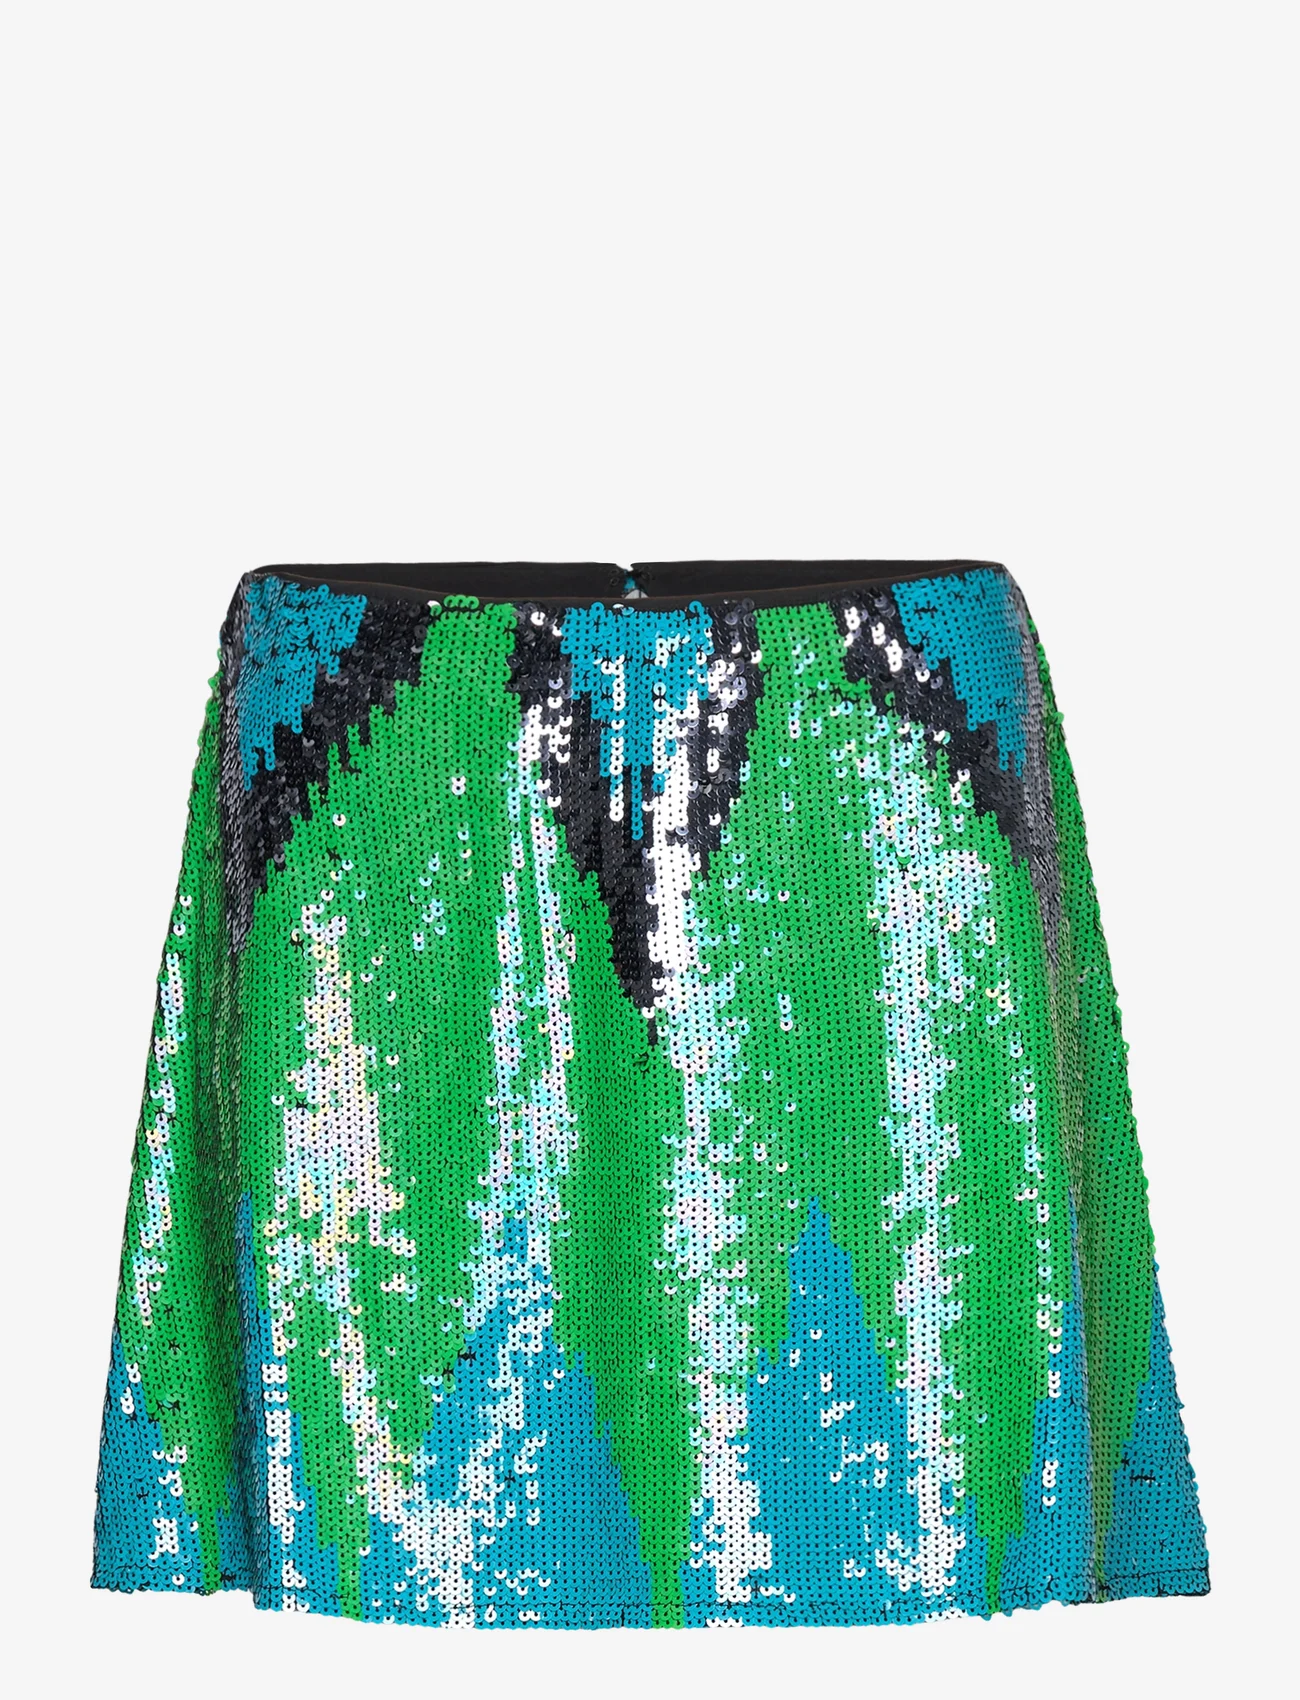 French Connection - EMIN EMBELLISHED SKIRT - kurze röcke - green mineral multi - 0